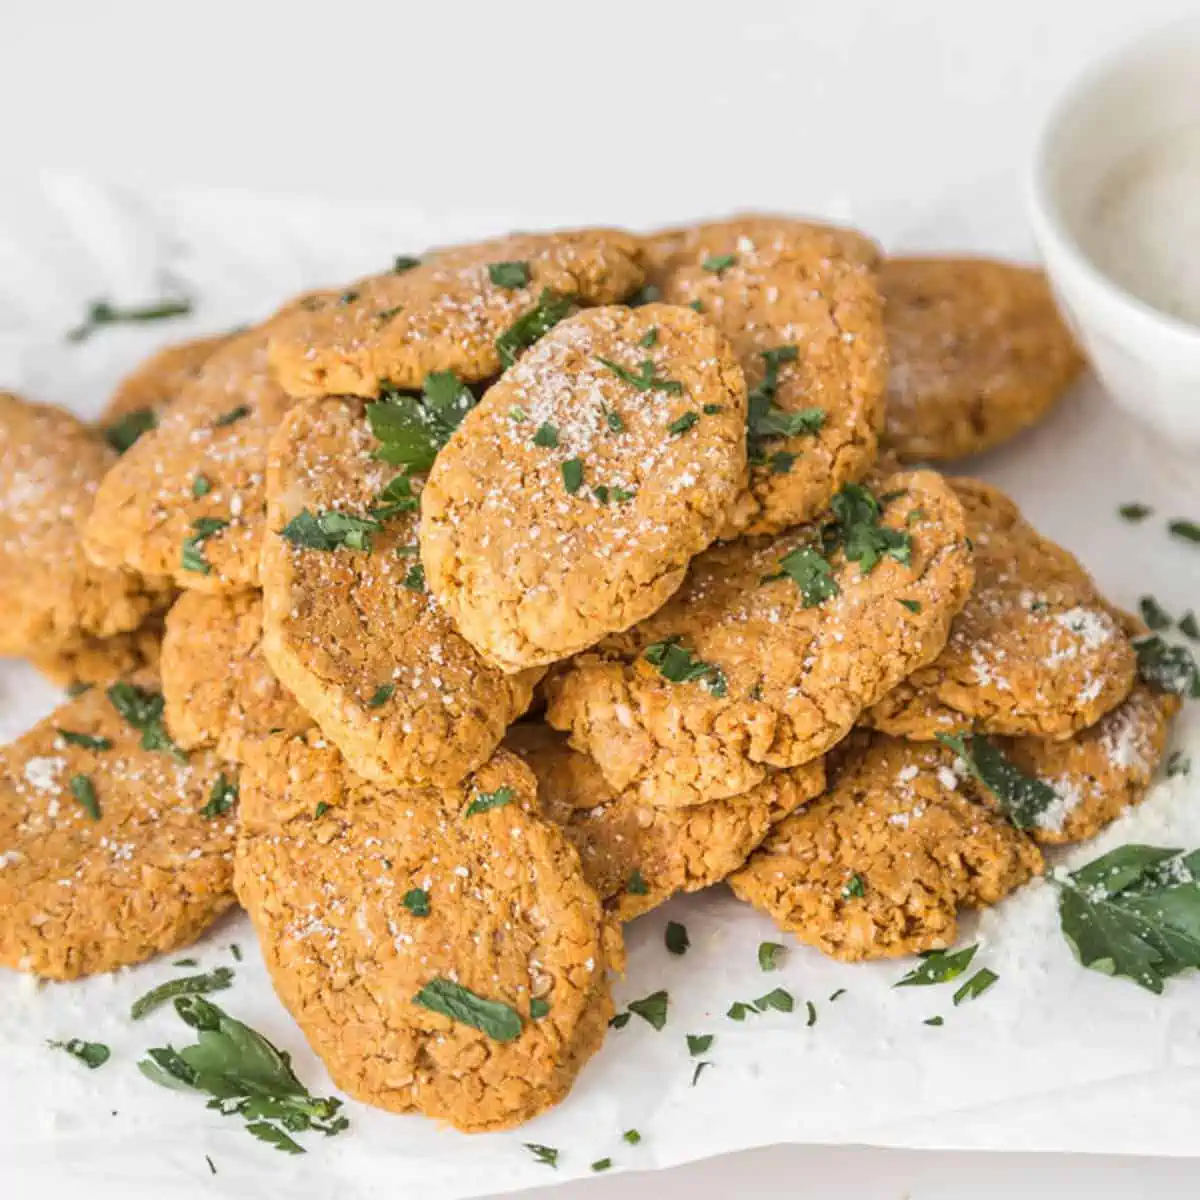 Pile of chickpea nuggets sprinkled with fresh chopped herbs.